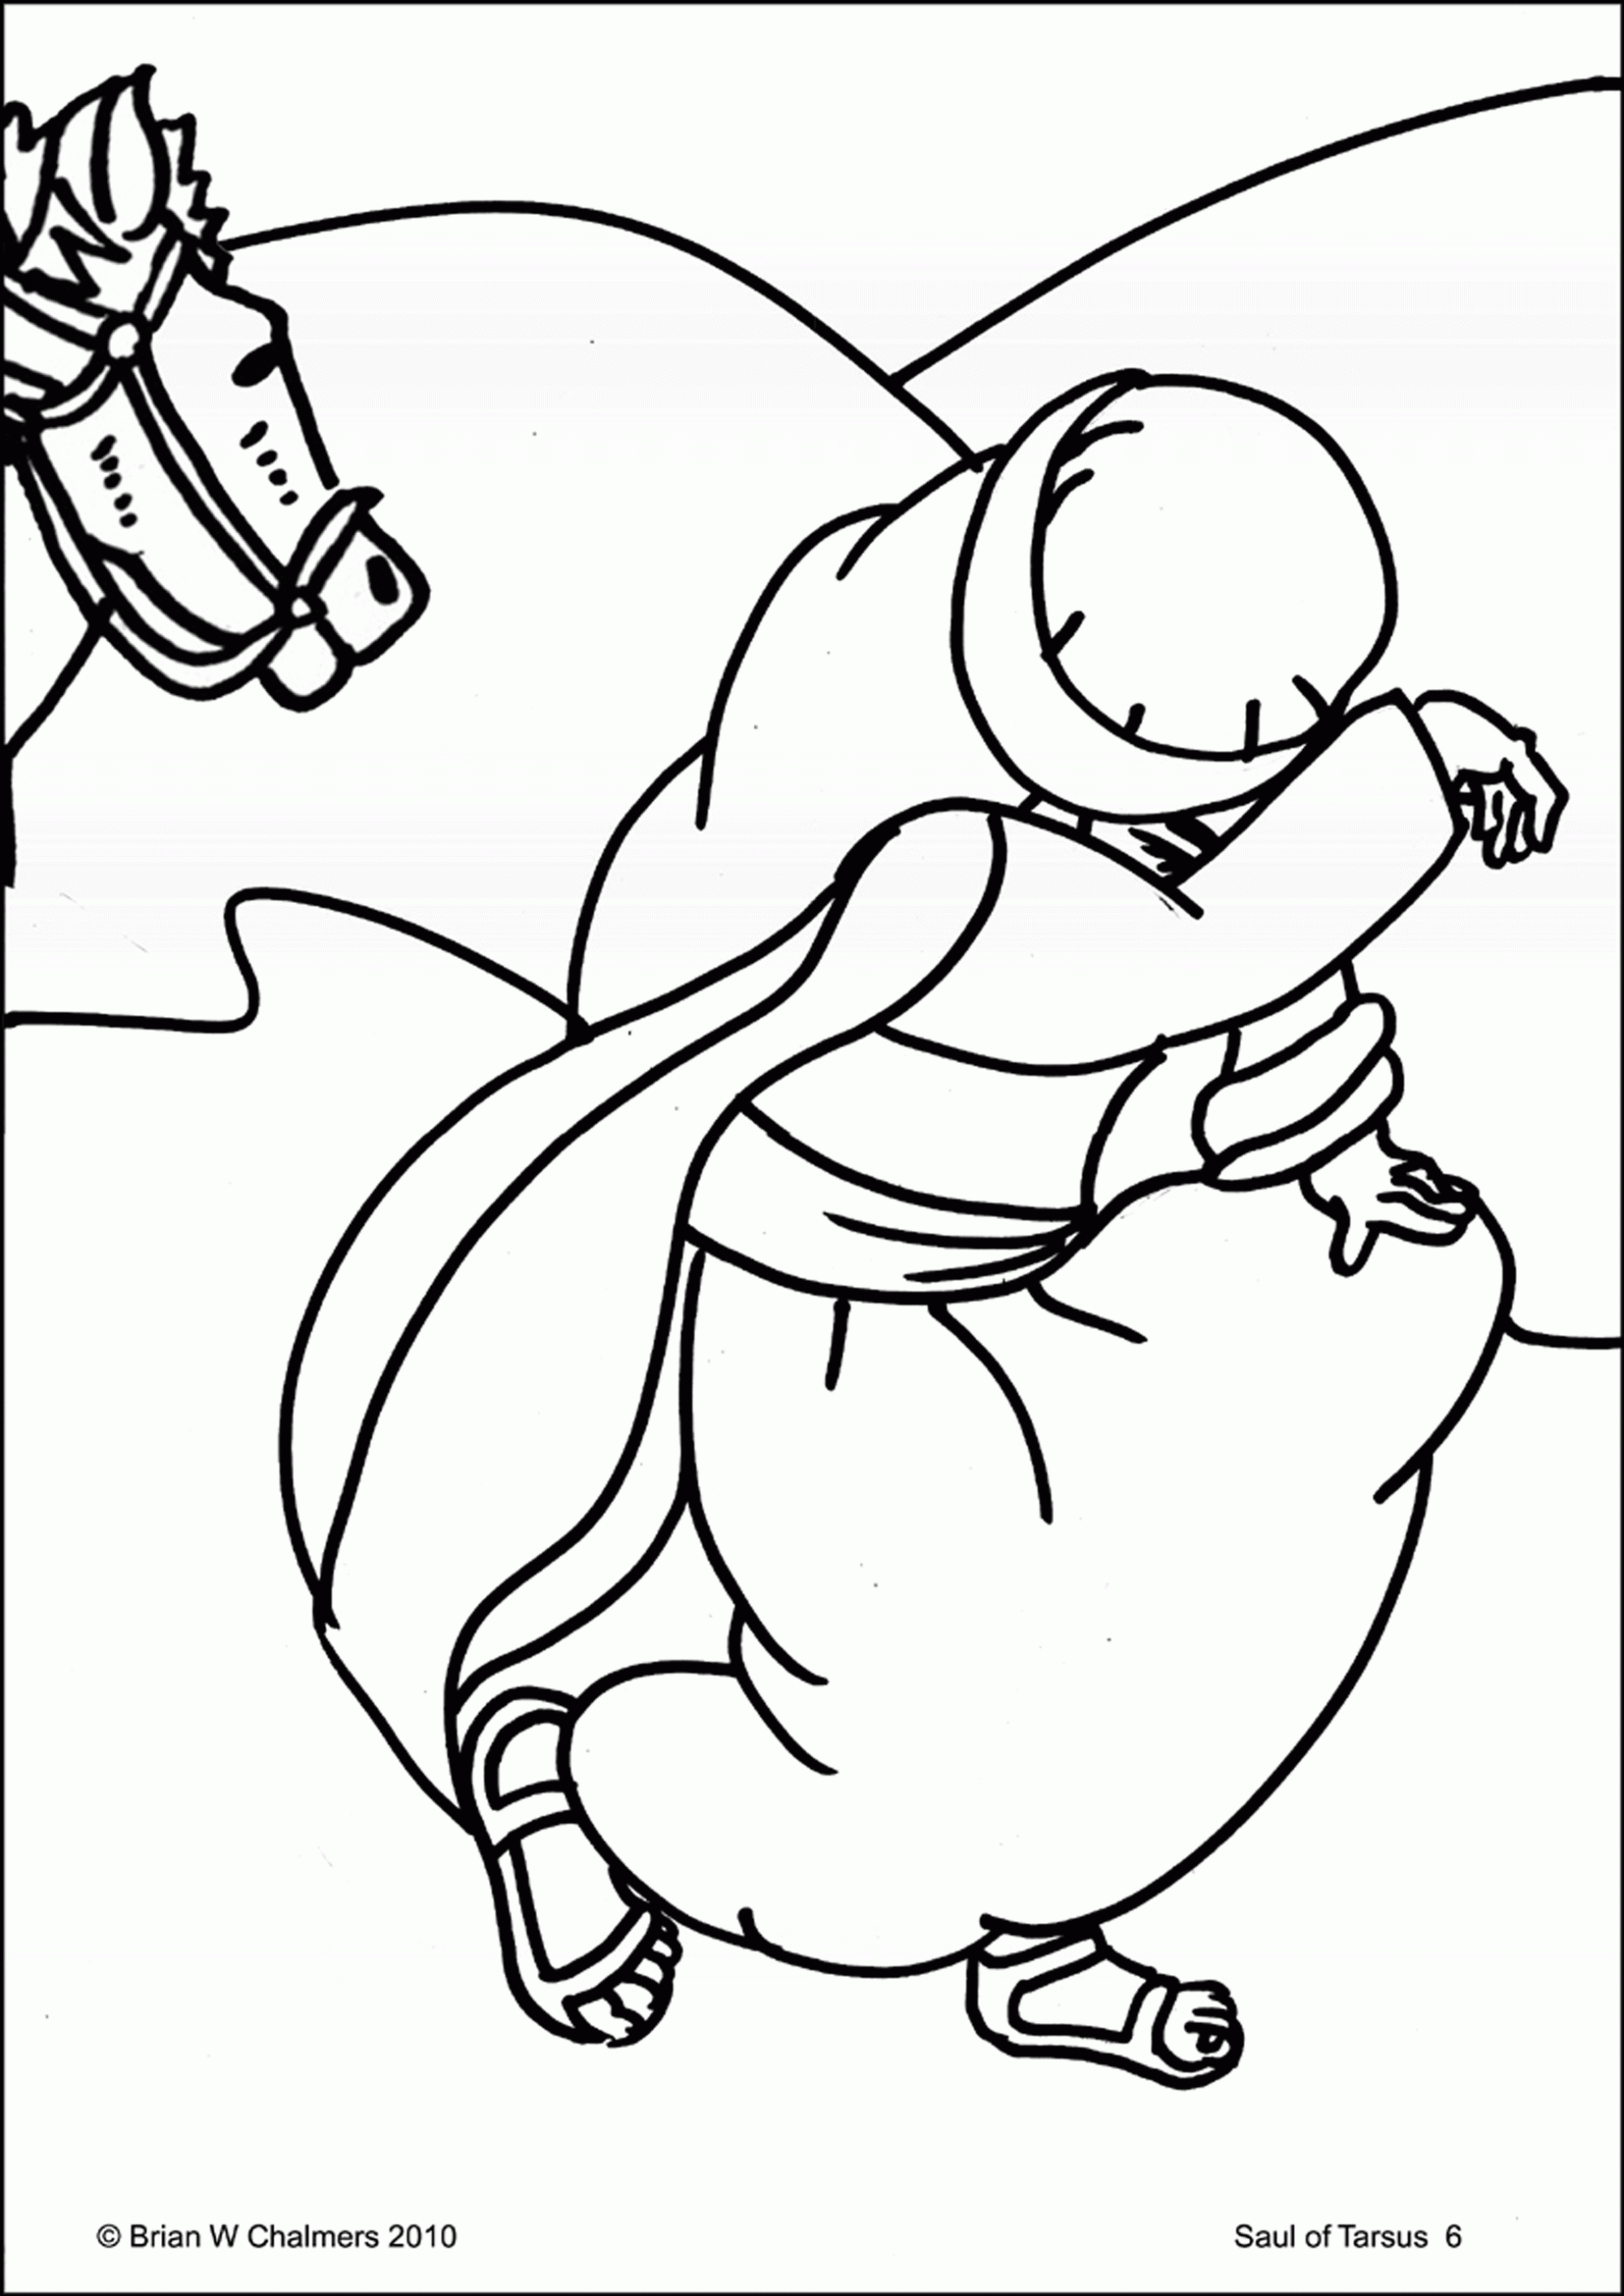 Sunday school coloring sheets | Coloring Pages, Bible ...